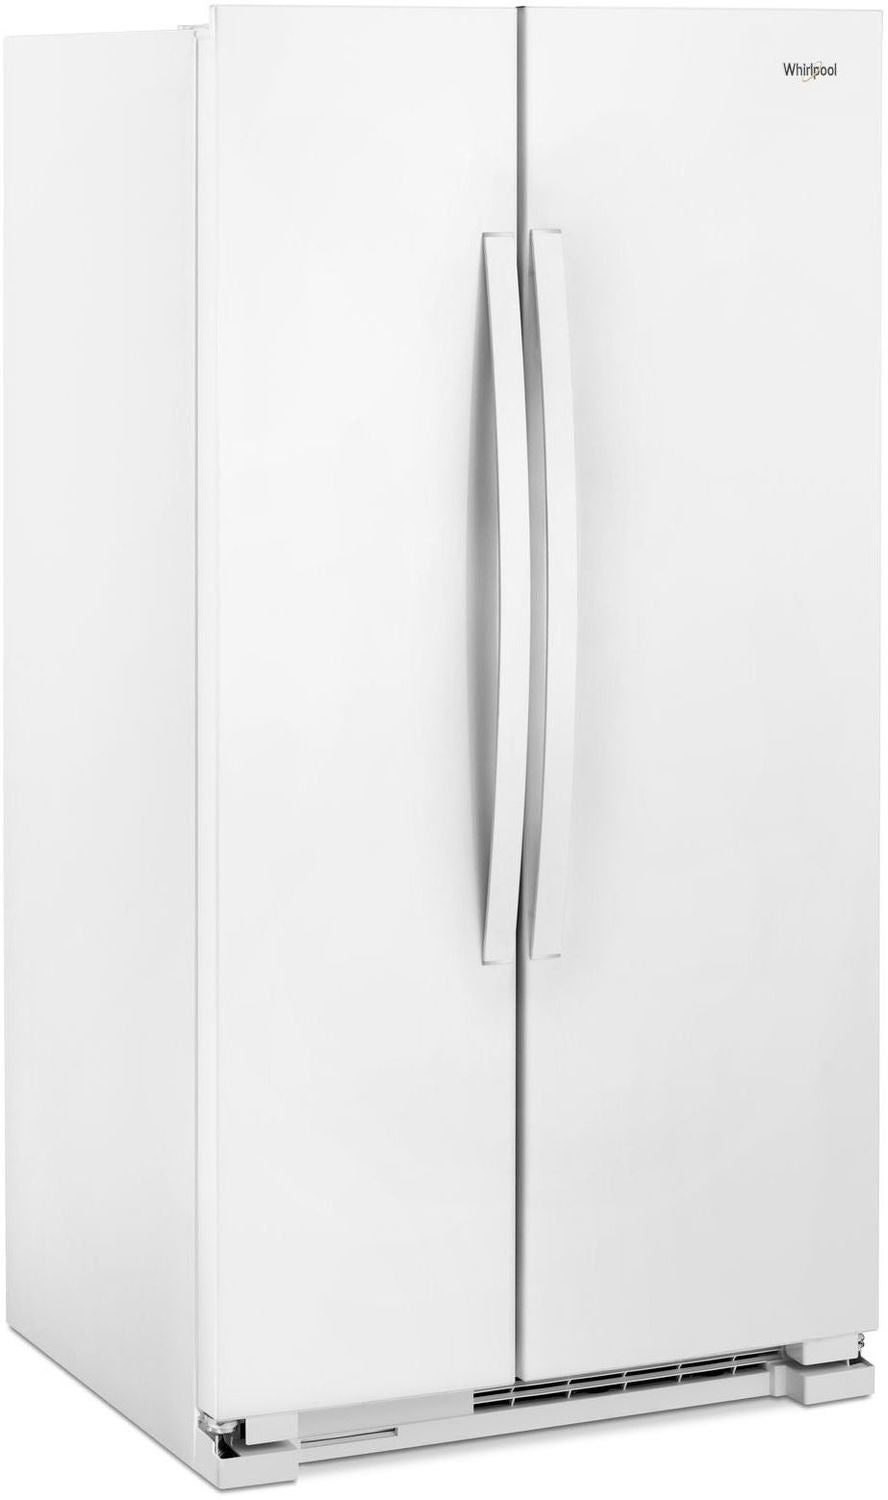 Whirlpool White Side-by-Side Refrigerator (22 Cu. Ft.) - WRS312SNHW